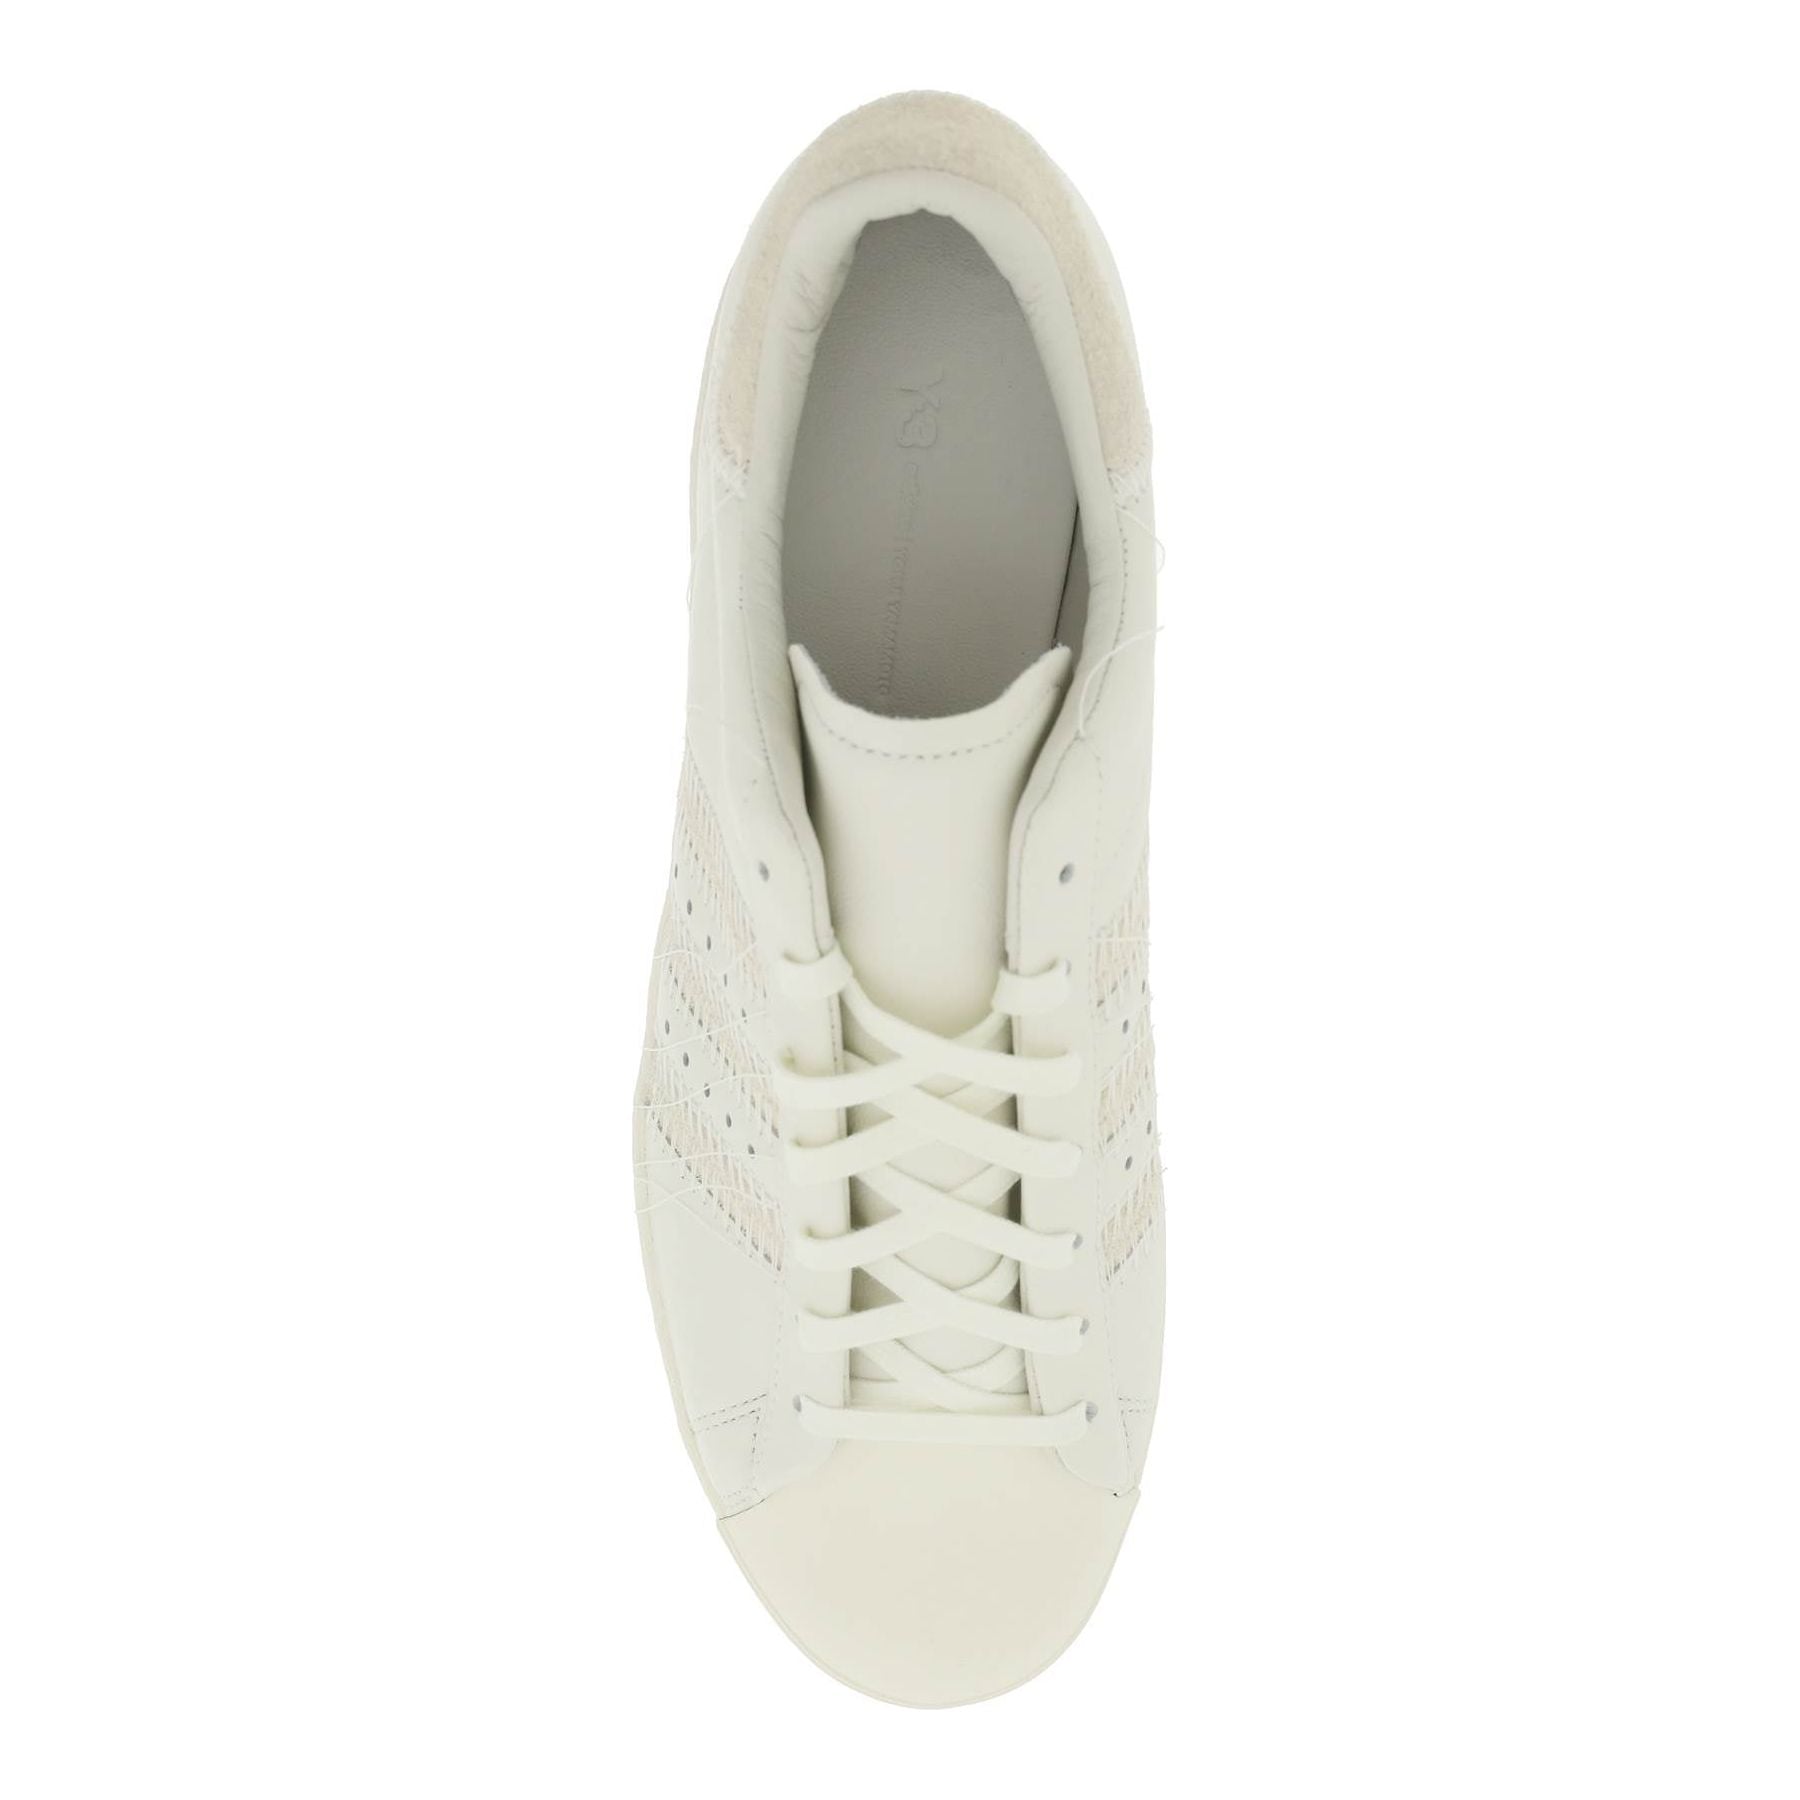 'Superstar' Leather Sneakers